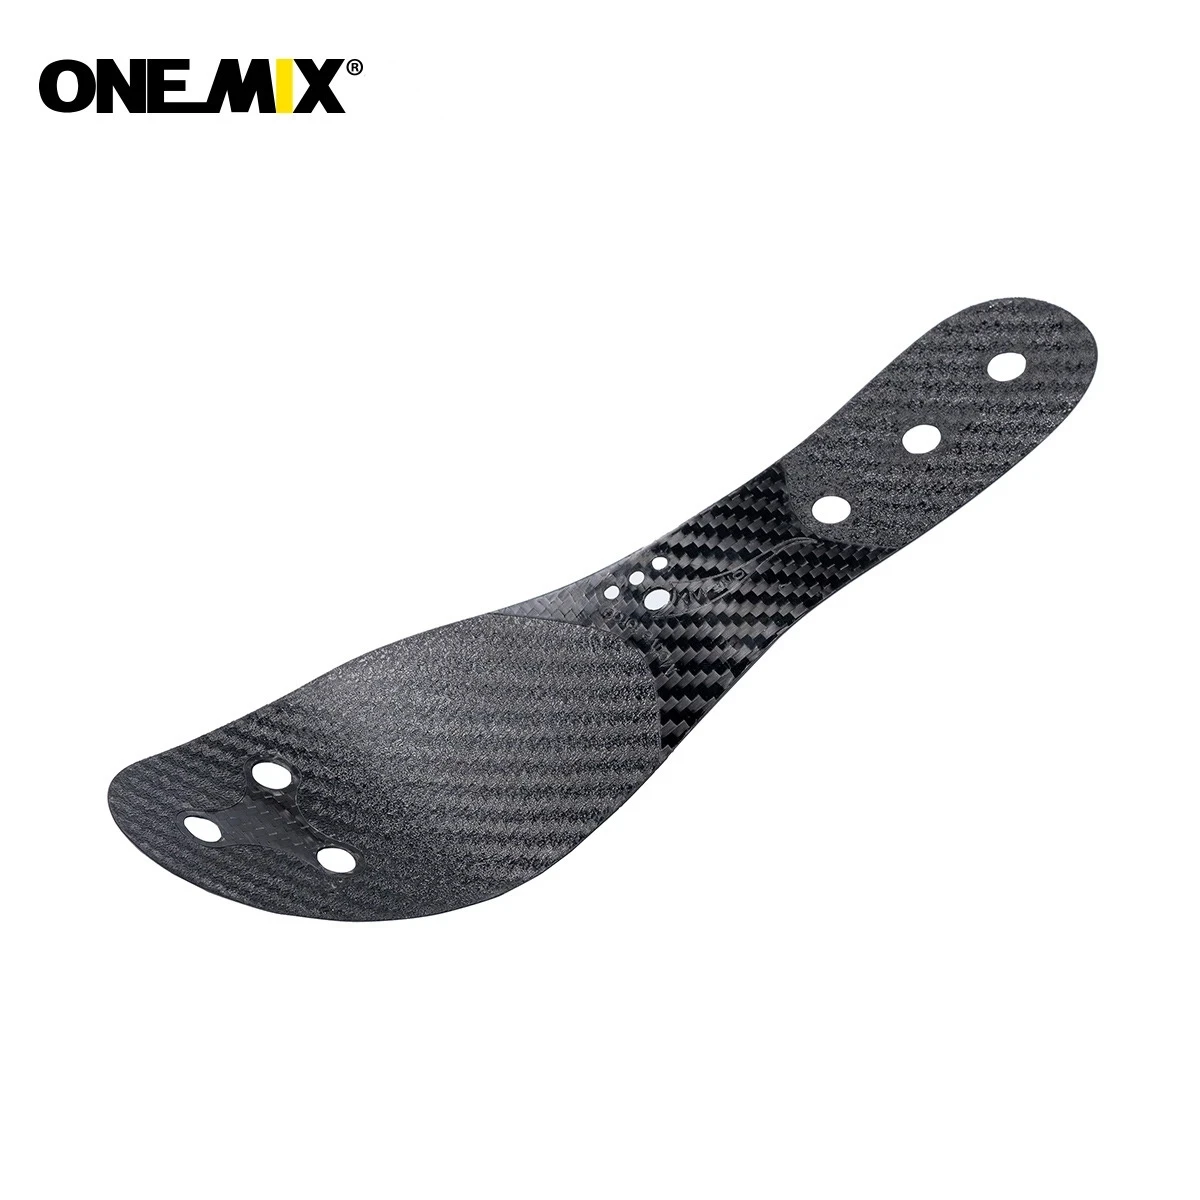 ONEMIX Marathon Training Running Shoes Special Carbon Plate 45 ° Forward Tilt to Improve Speed Students Test Competitive Running